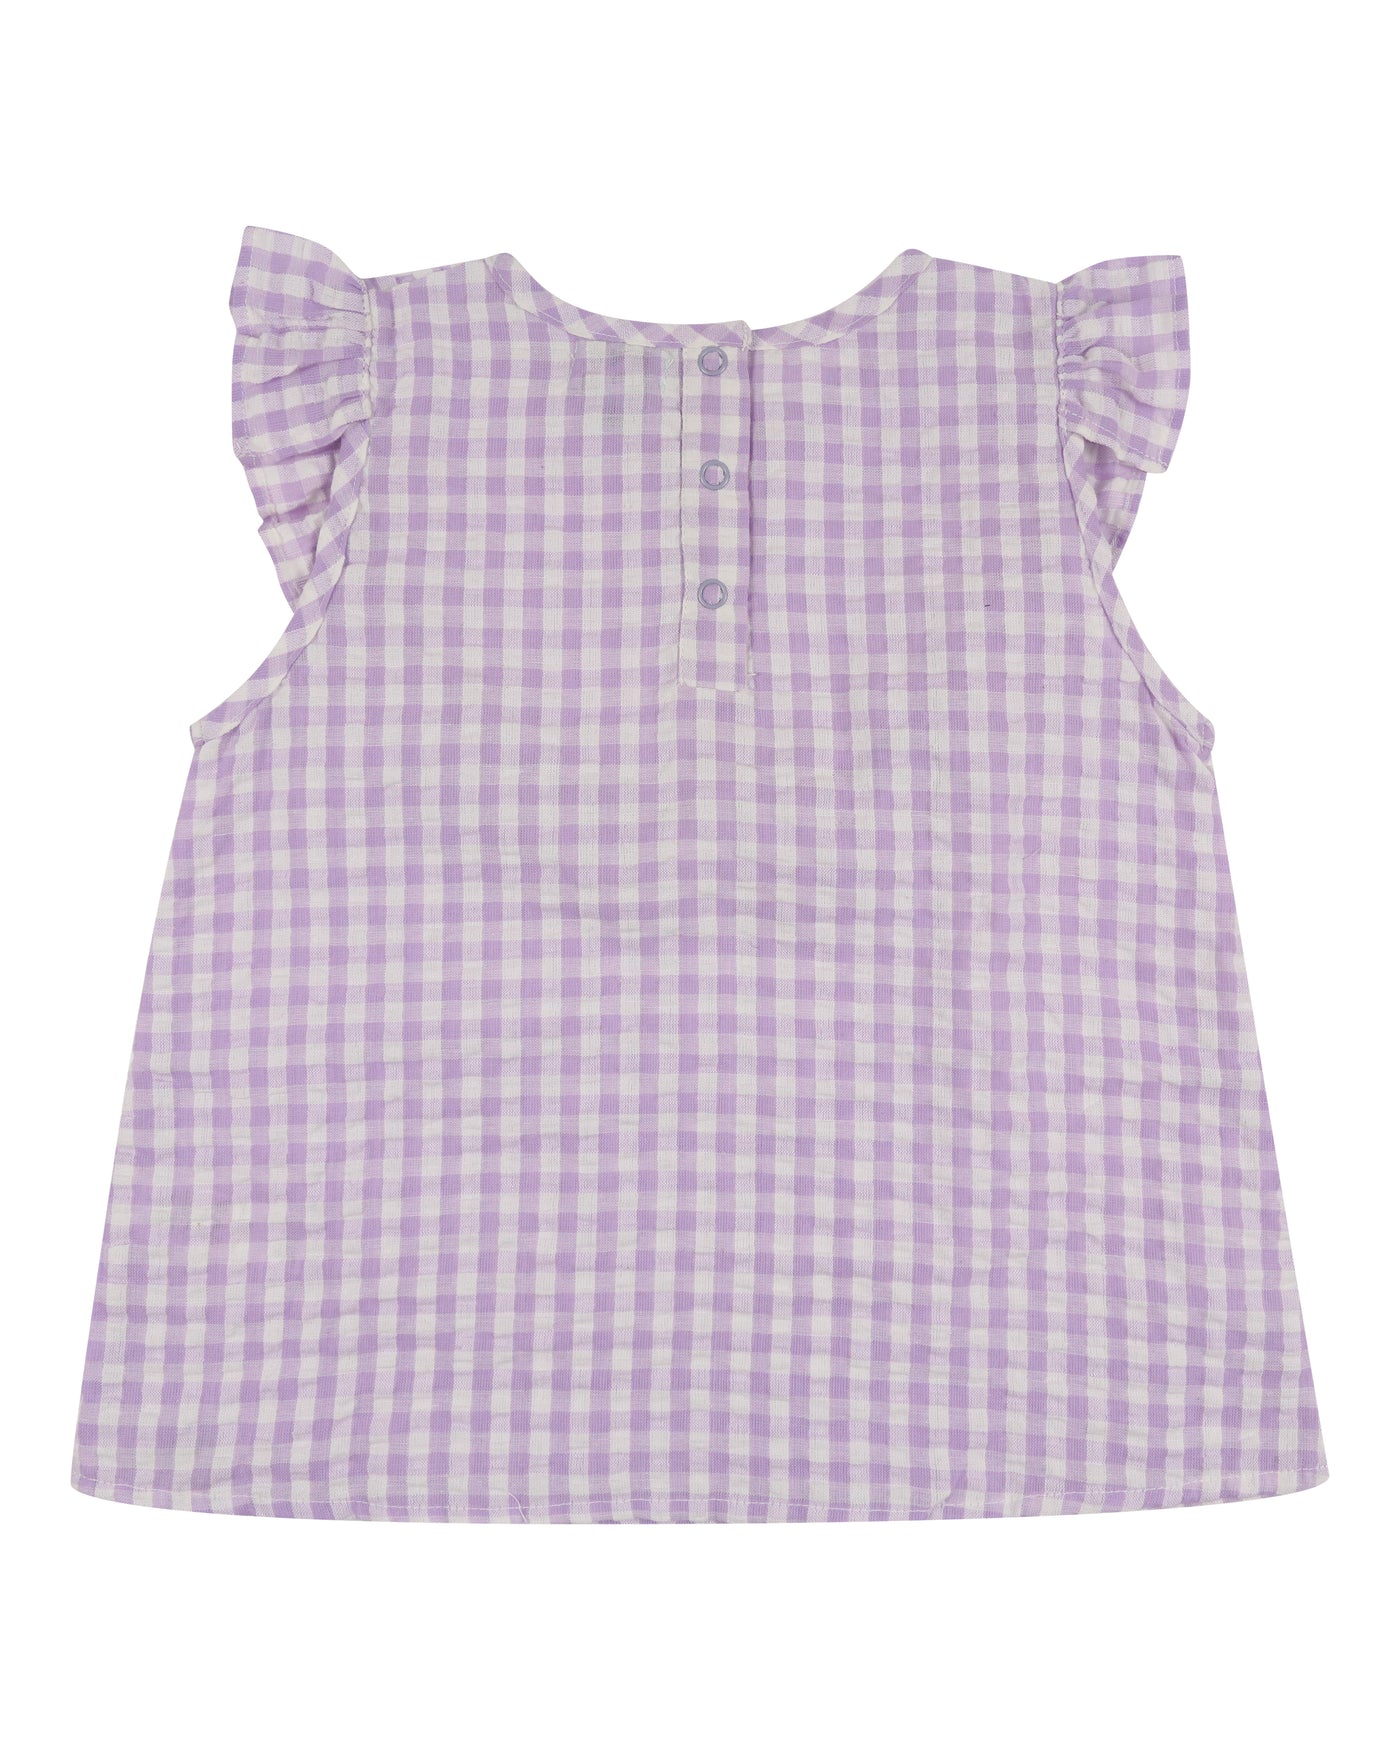 Lilly and Sid Frill Gingham Blouse